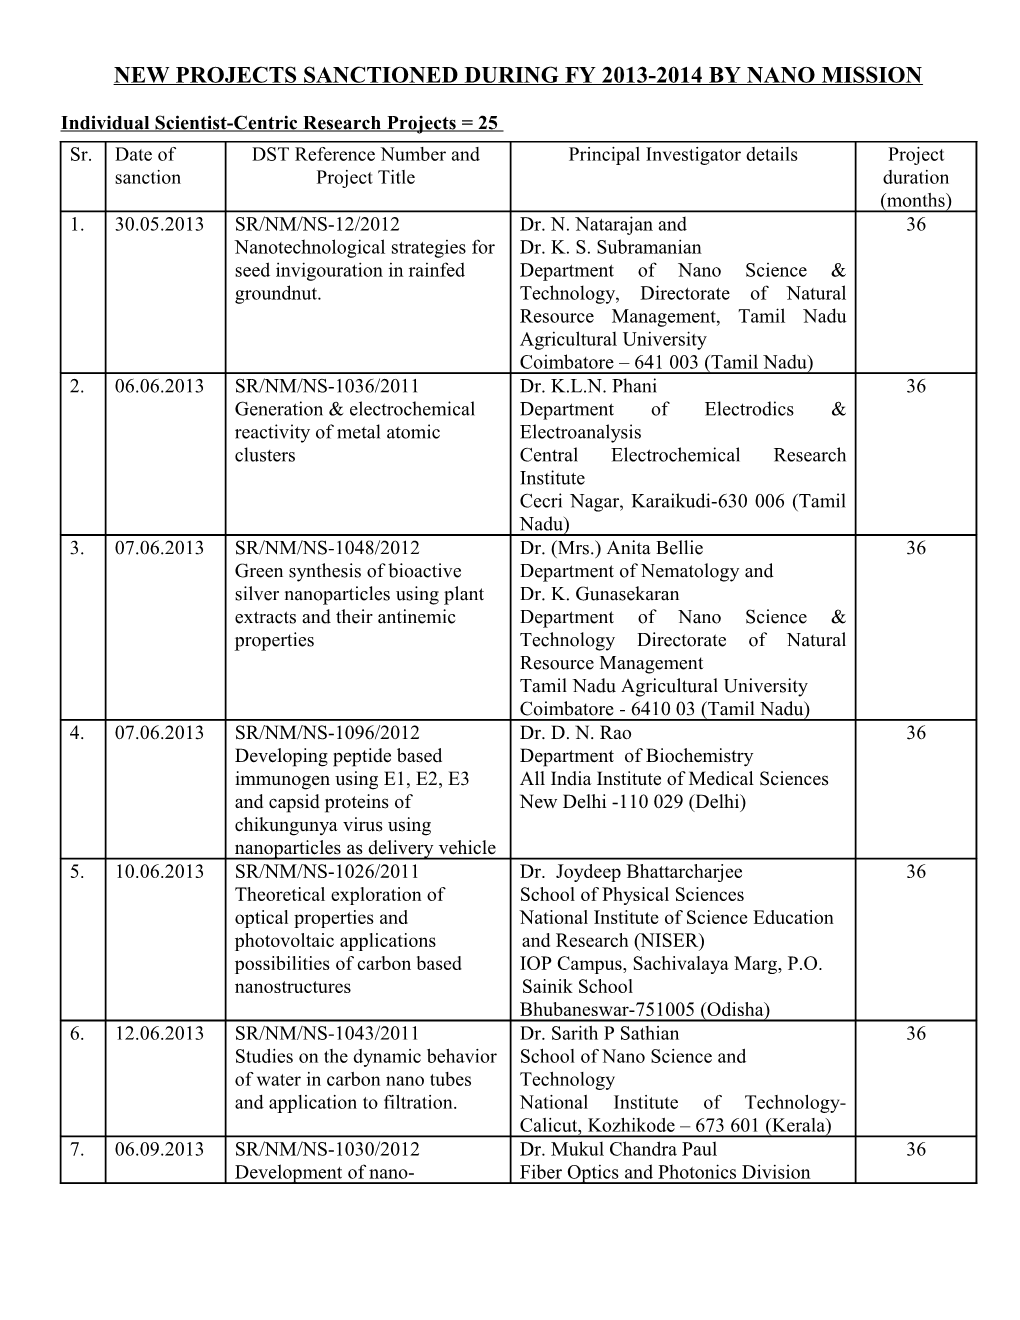 New Projects Sanctioned During Fy 2013-2014 by Nano Mission